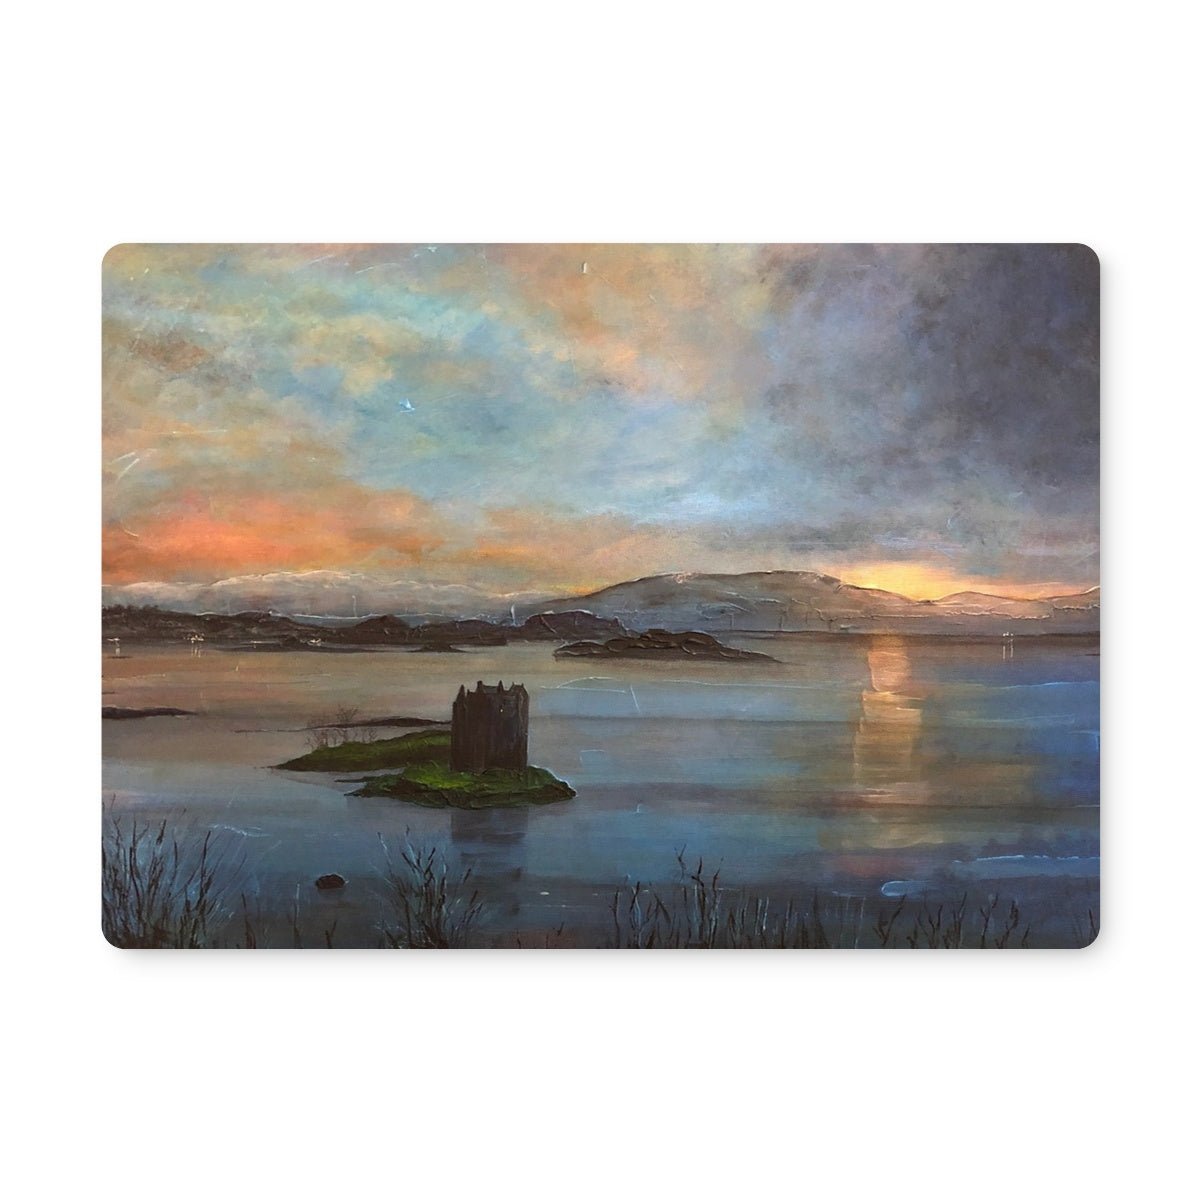 Castle Stalker Twilight Art Gifts Placemat-Placemats-Scottish Castles Art Gallery-4 Placemats-Paintings, Prints, Homeware, Art Gifts From Scotland By Scottish Artist Kevin Hunter